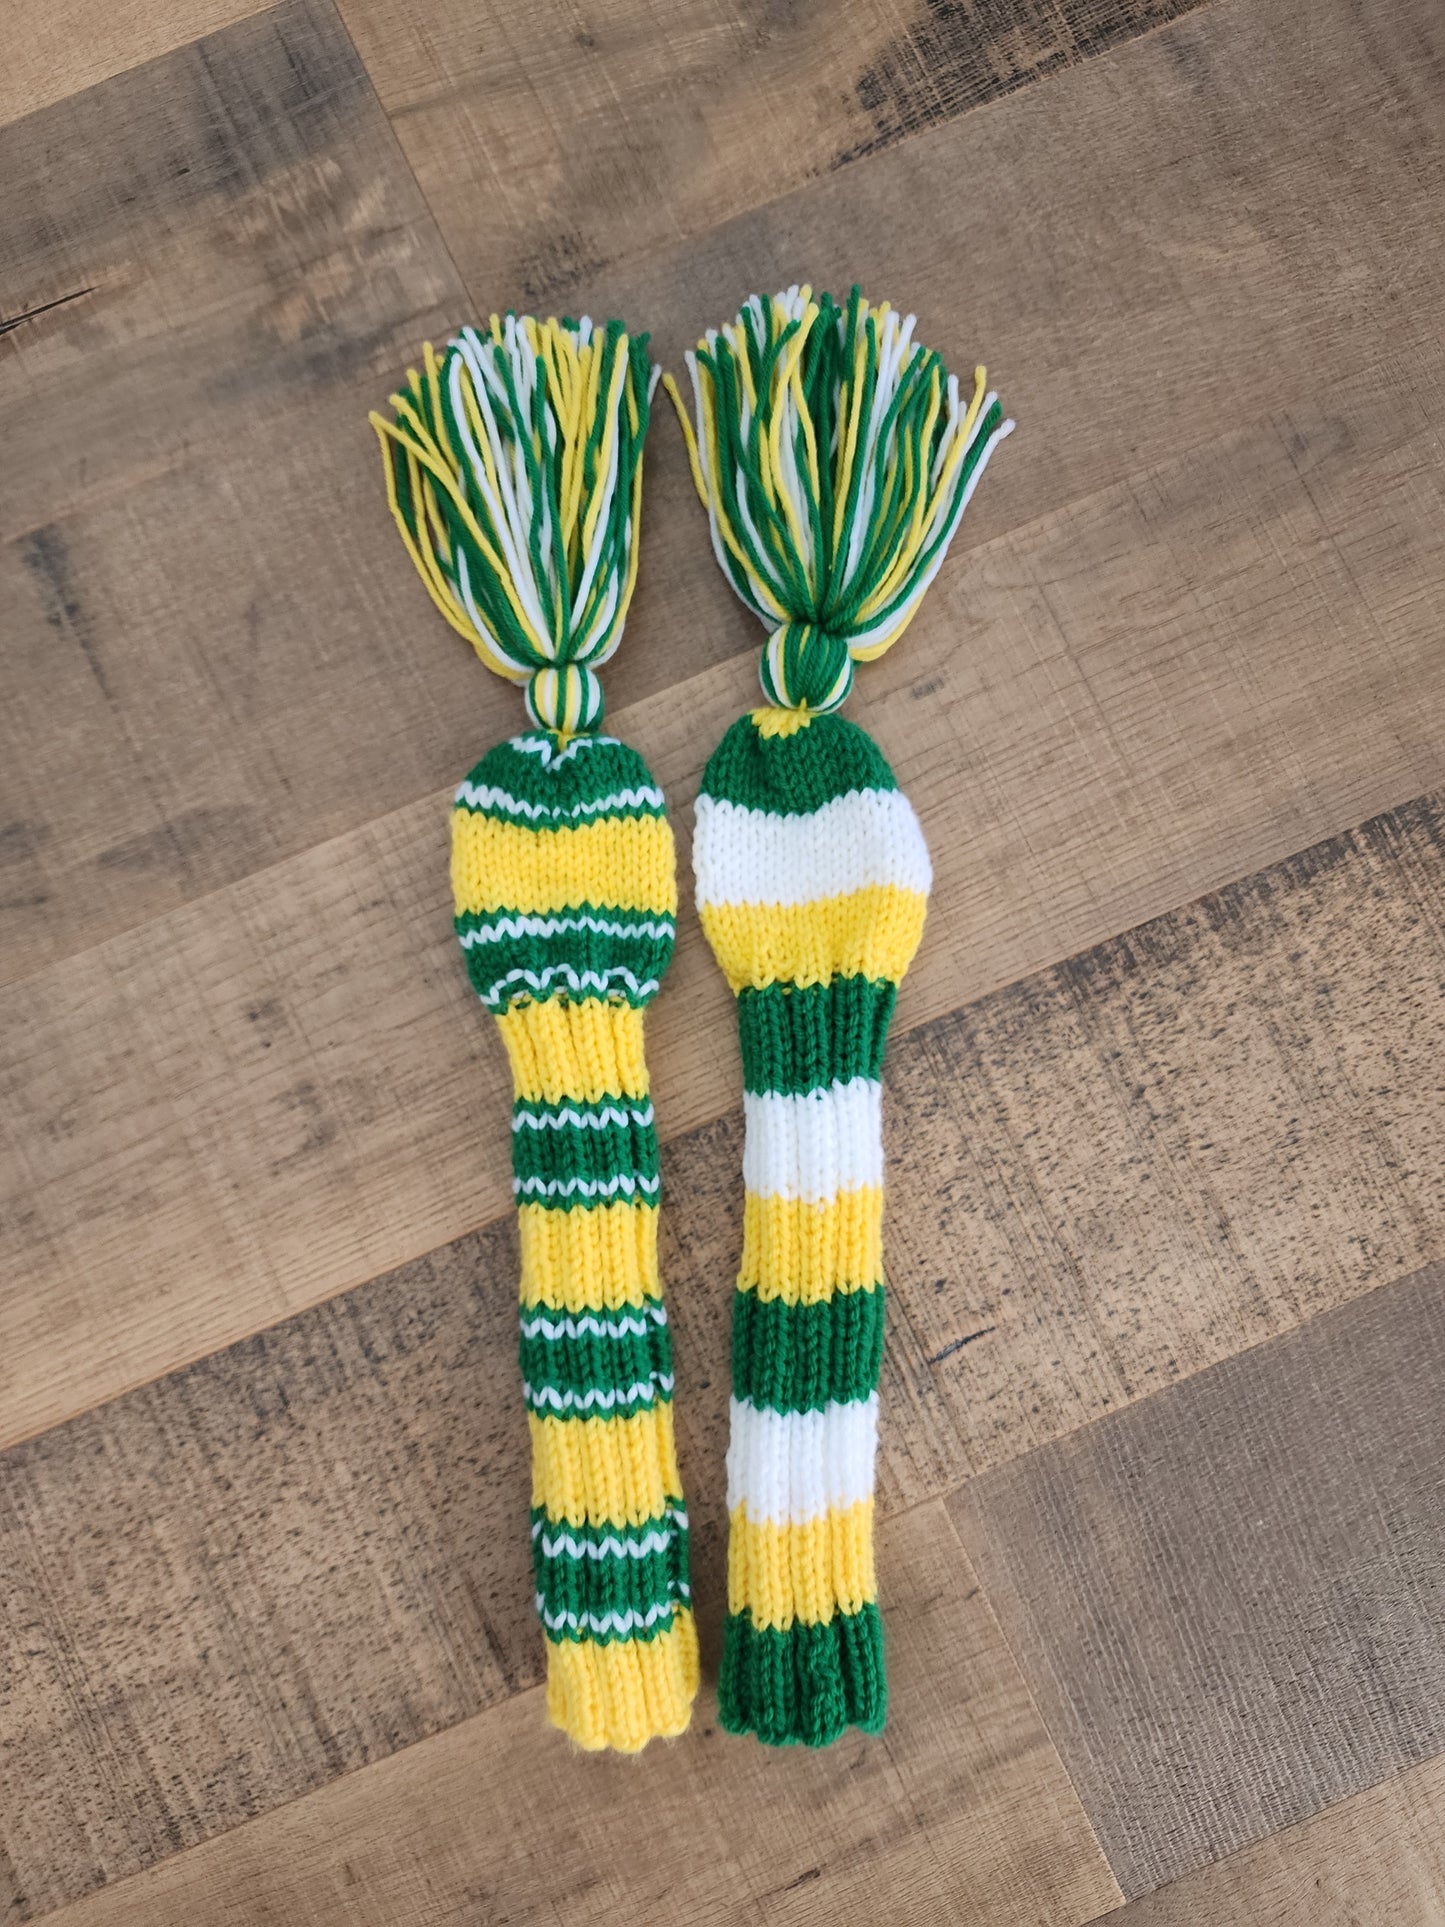 Hand Knit Golf Club Head Covers Retro-Vintage Green, Yellow & White with Tassels for Fairway Woods